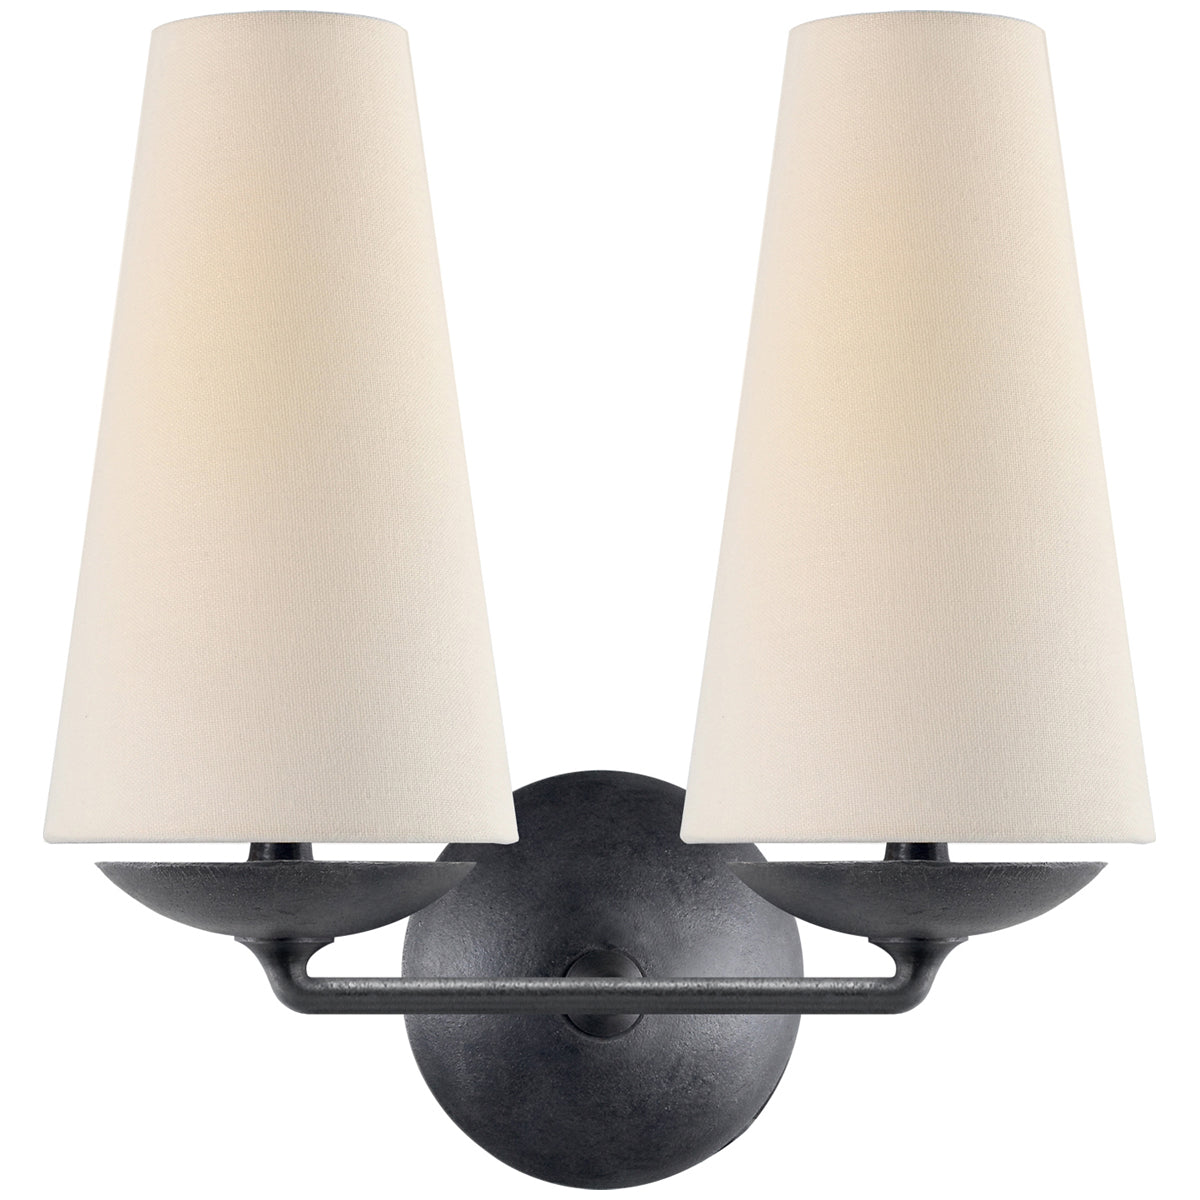 Visual Comfort Fontaine Double Sconce